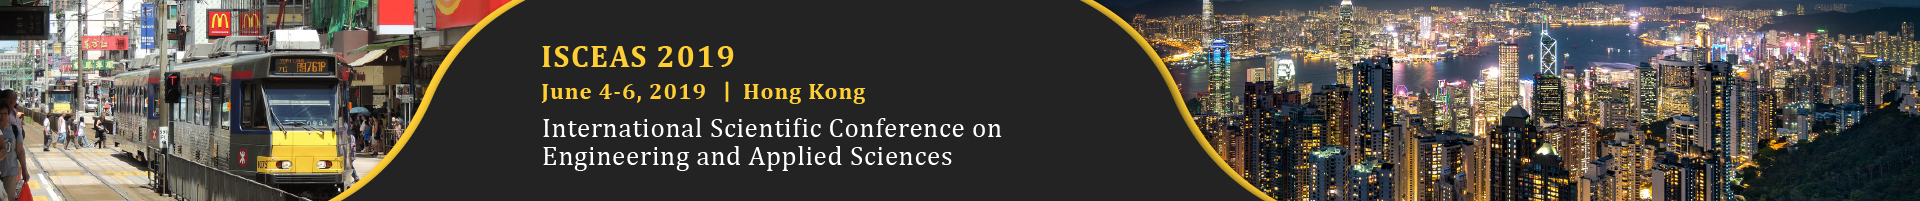 ISCEAS 2019  International  Scientific Conference on Engineering and Applied Sciences, Hong Kong, China